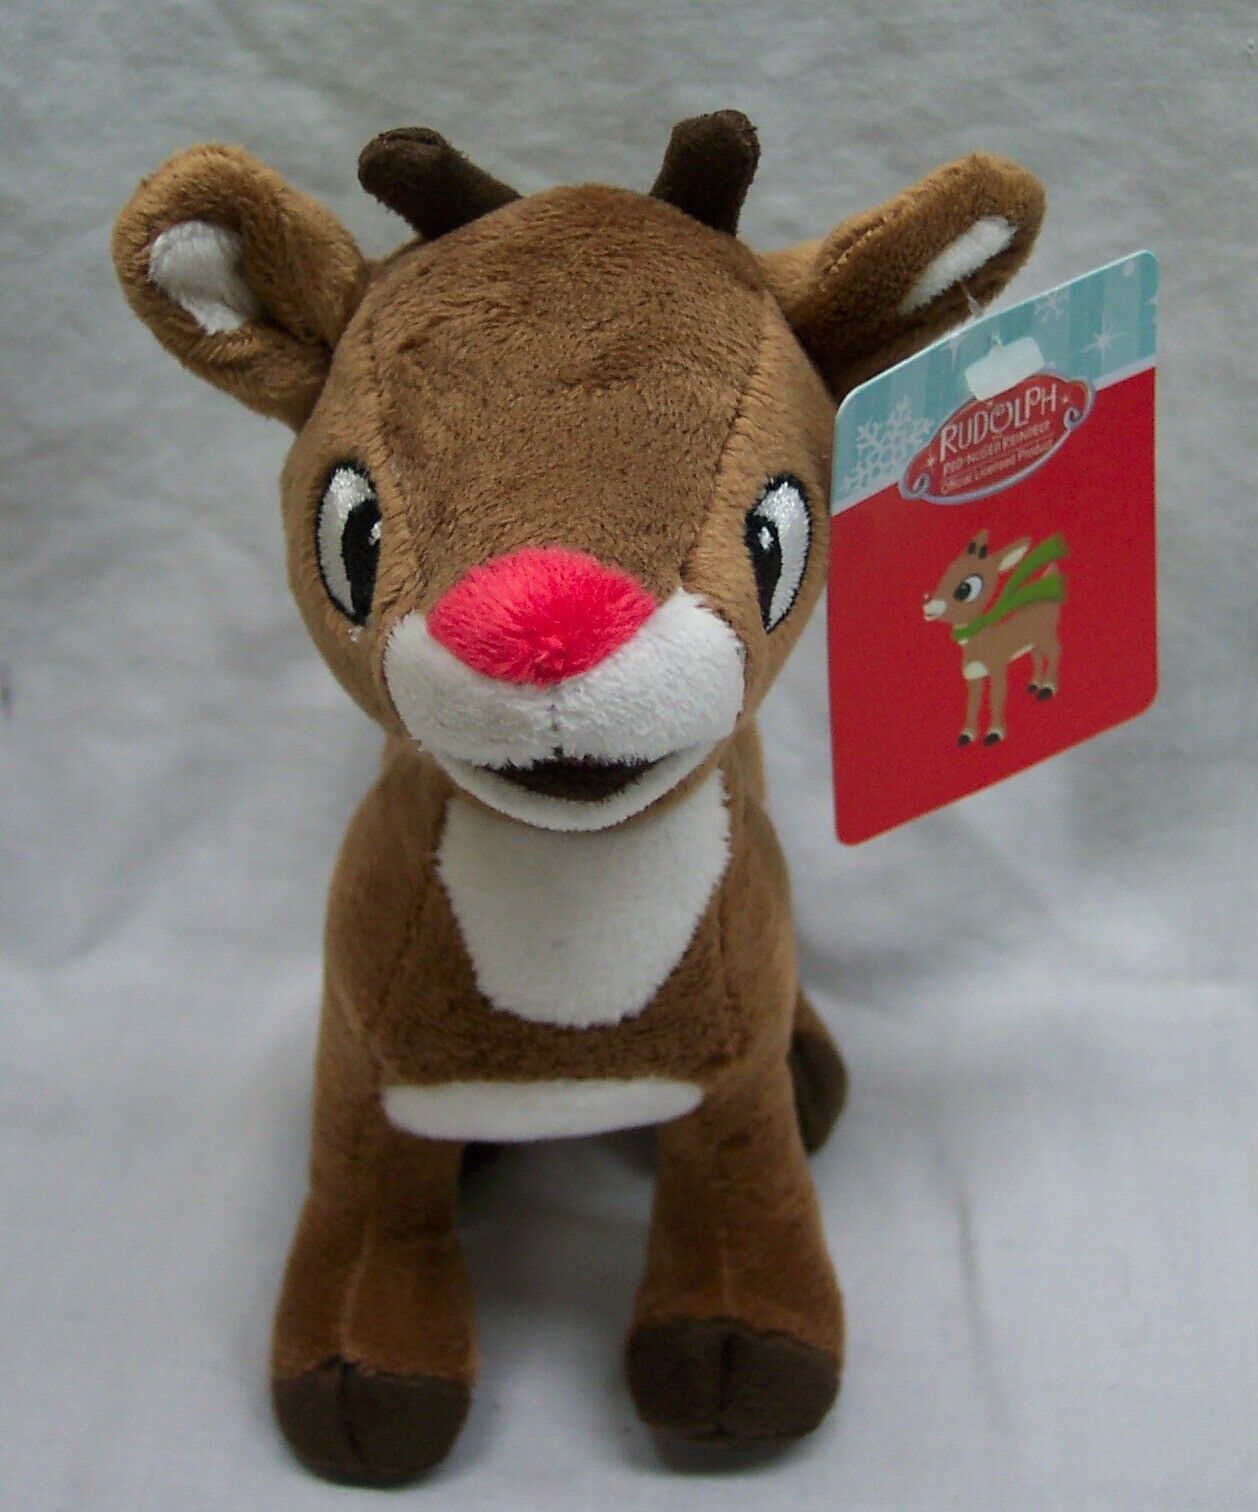 RUDOLPH THE RED-NOSED REINDEER 6" Plush STUFFED ANIMAL NEW Island of ...